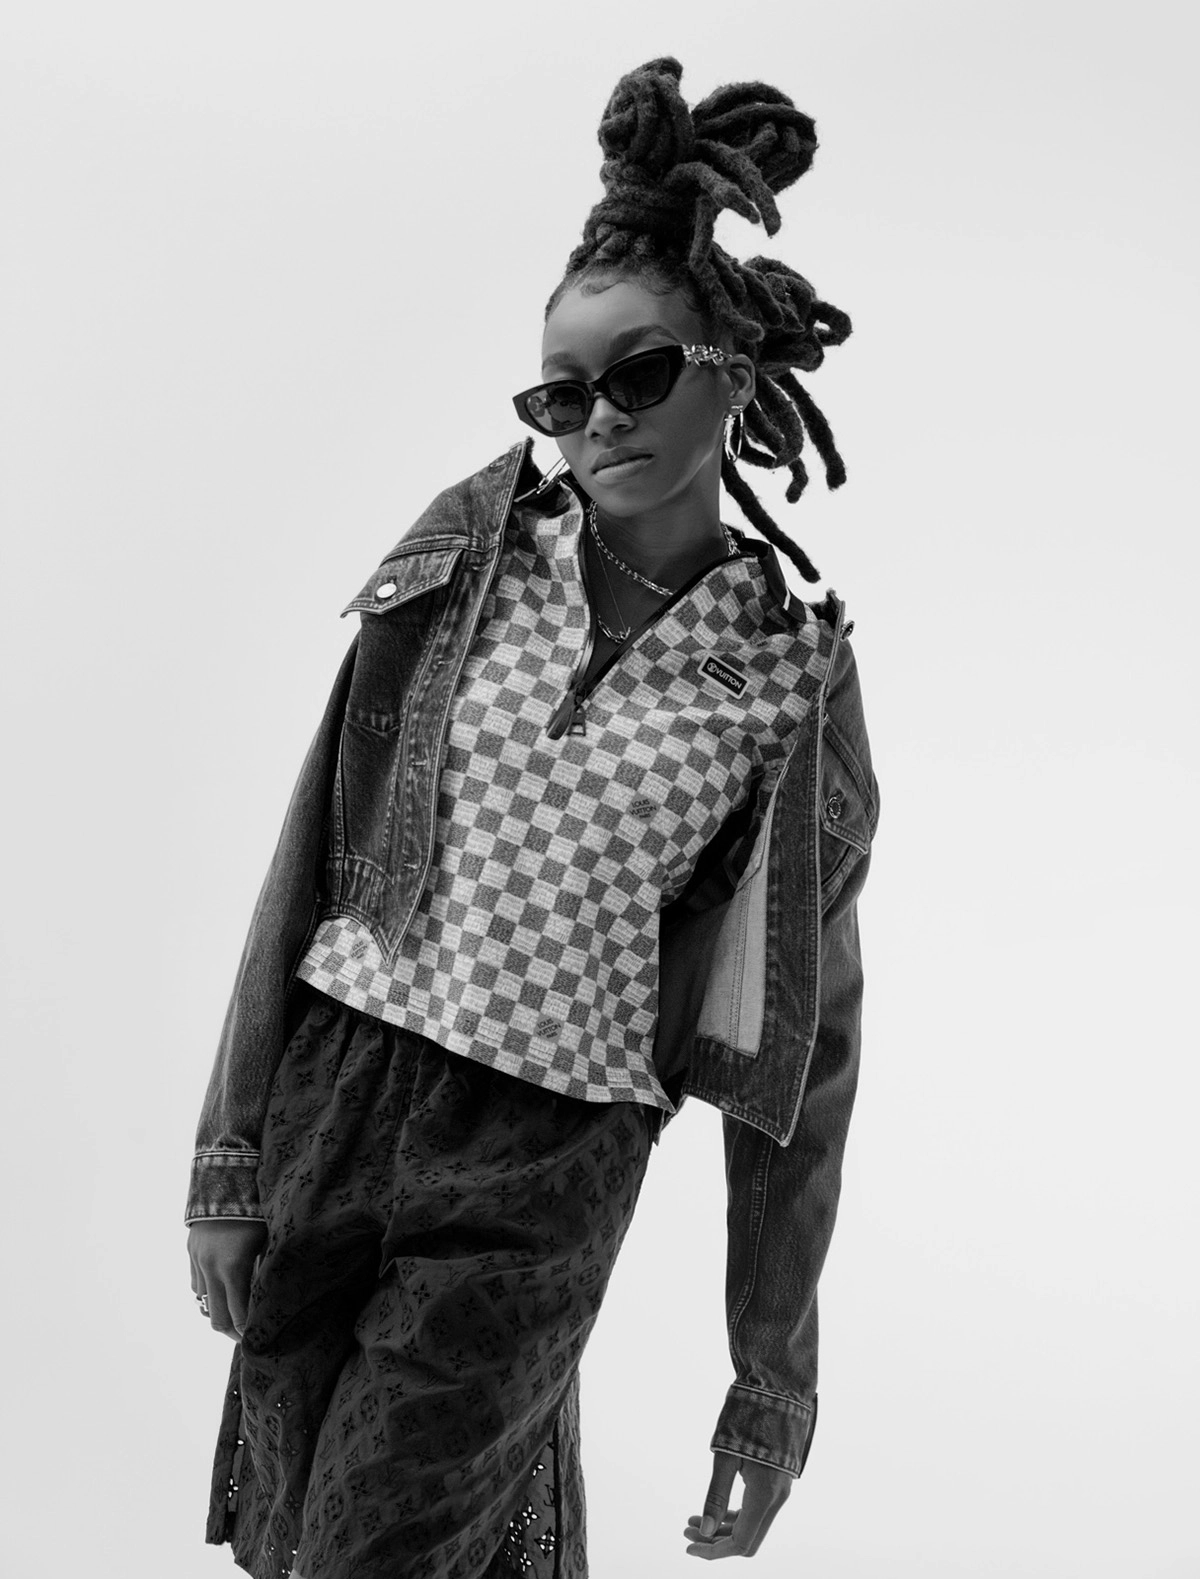 Little Simz covers Document Journal Summer Pre-Fall 2022 by Jackie Nickerson